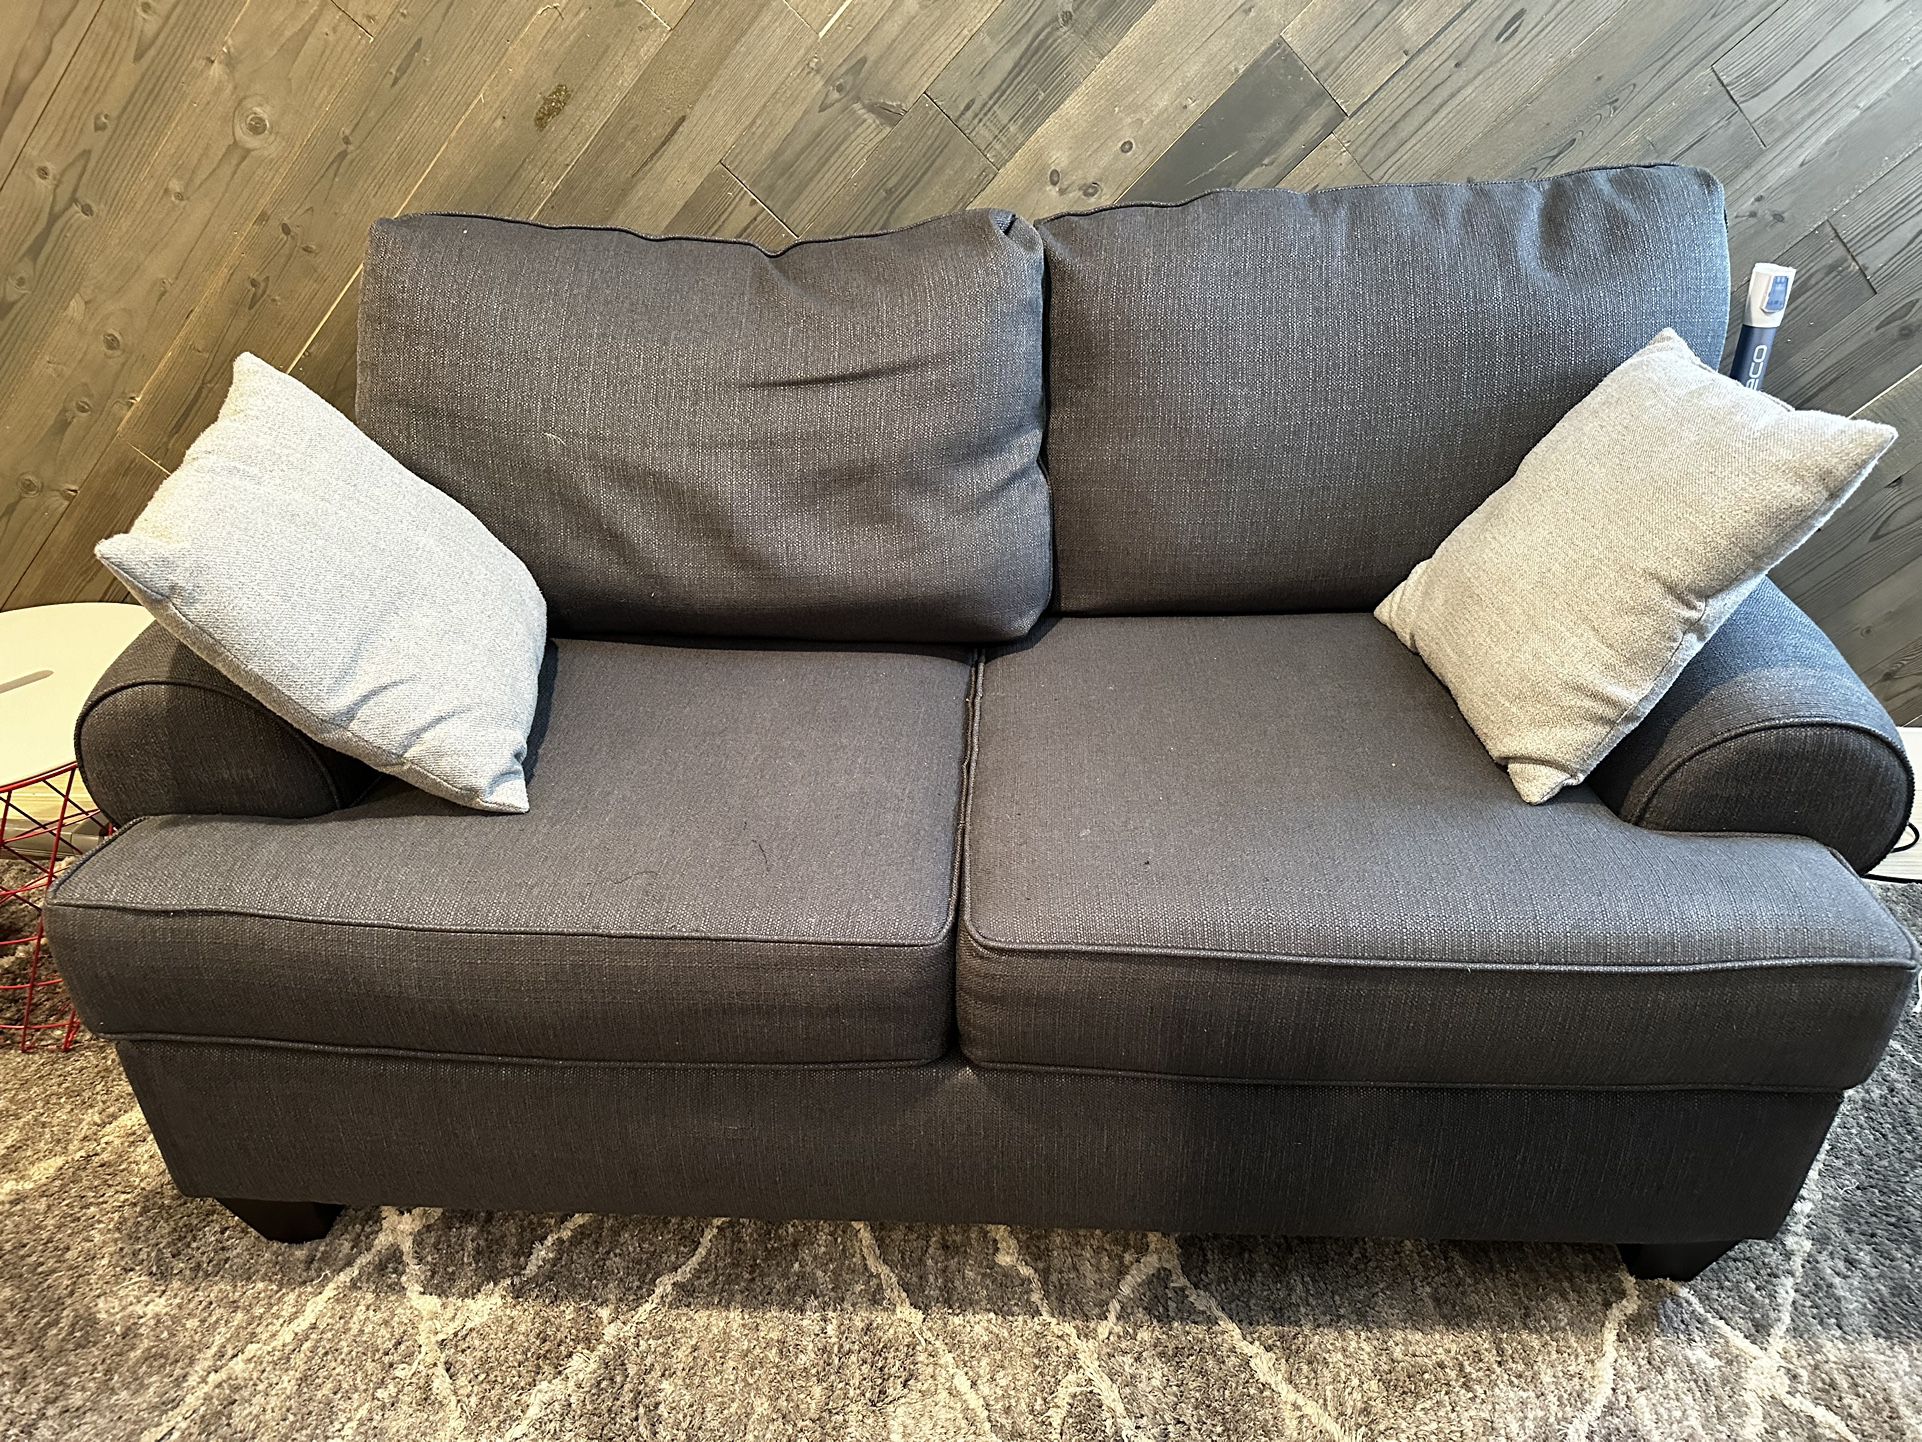 MUST SELL THIS WEEKEND!!! Modern Loveseat in Charcoal Fabric